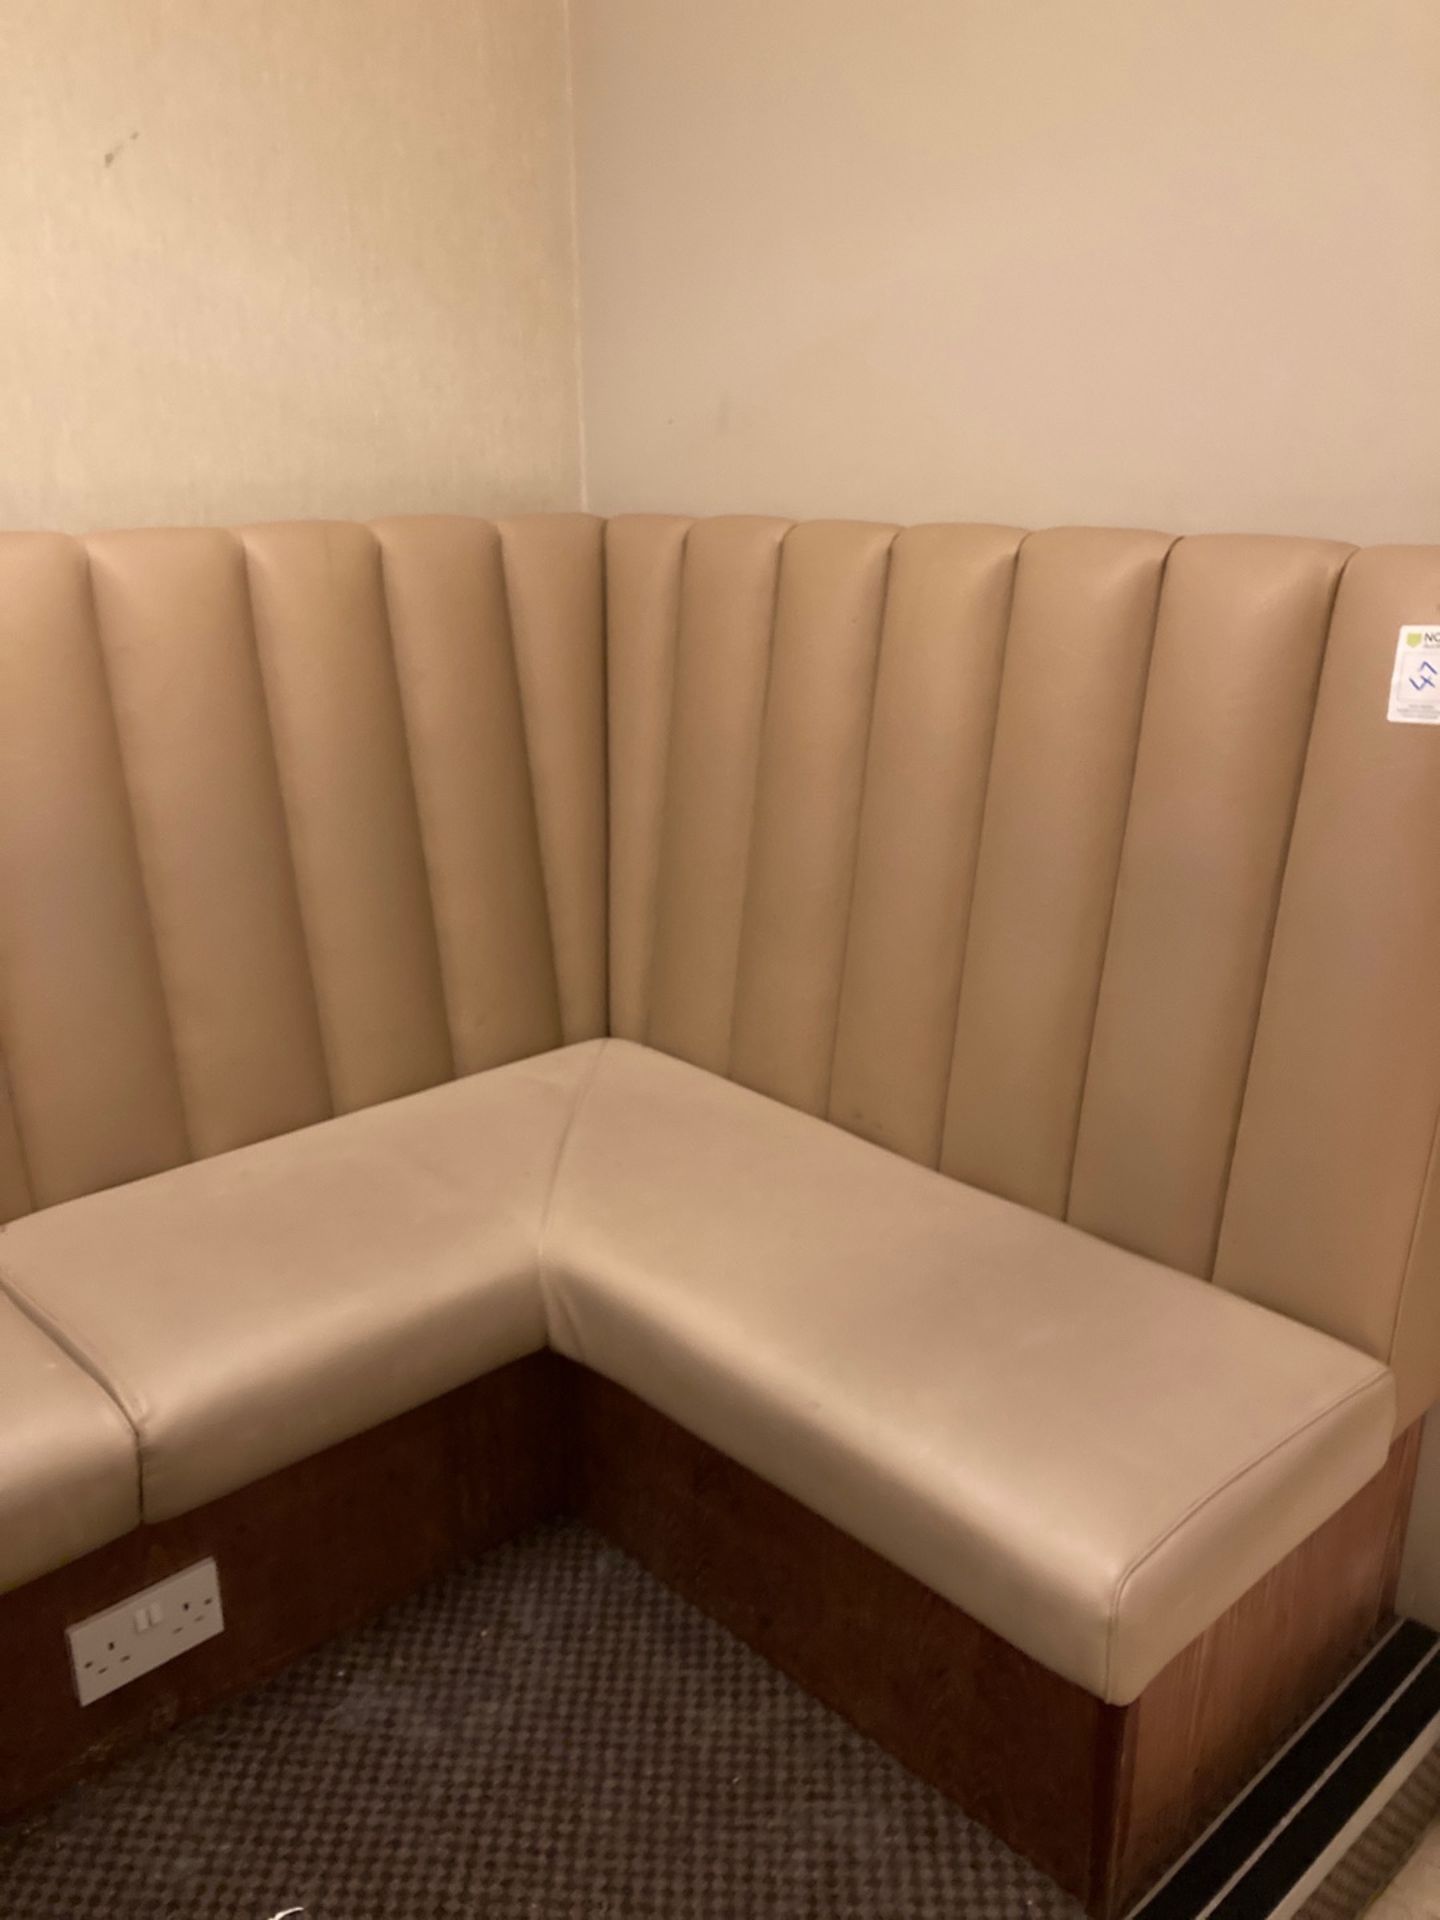 Banquette Seating - Image 3 of 4